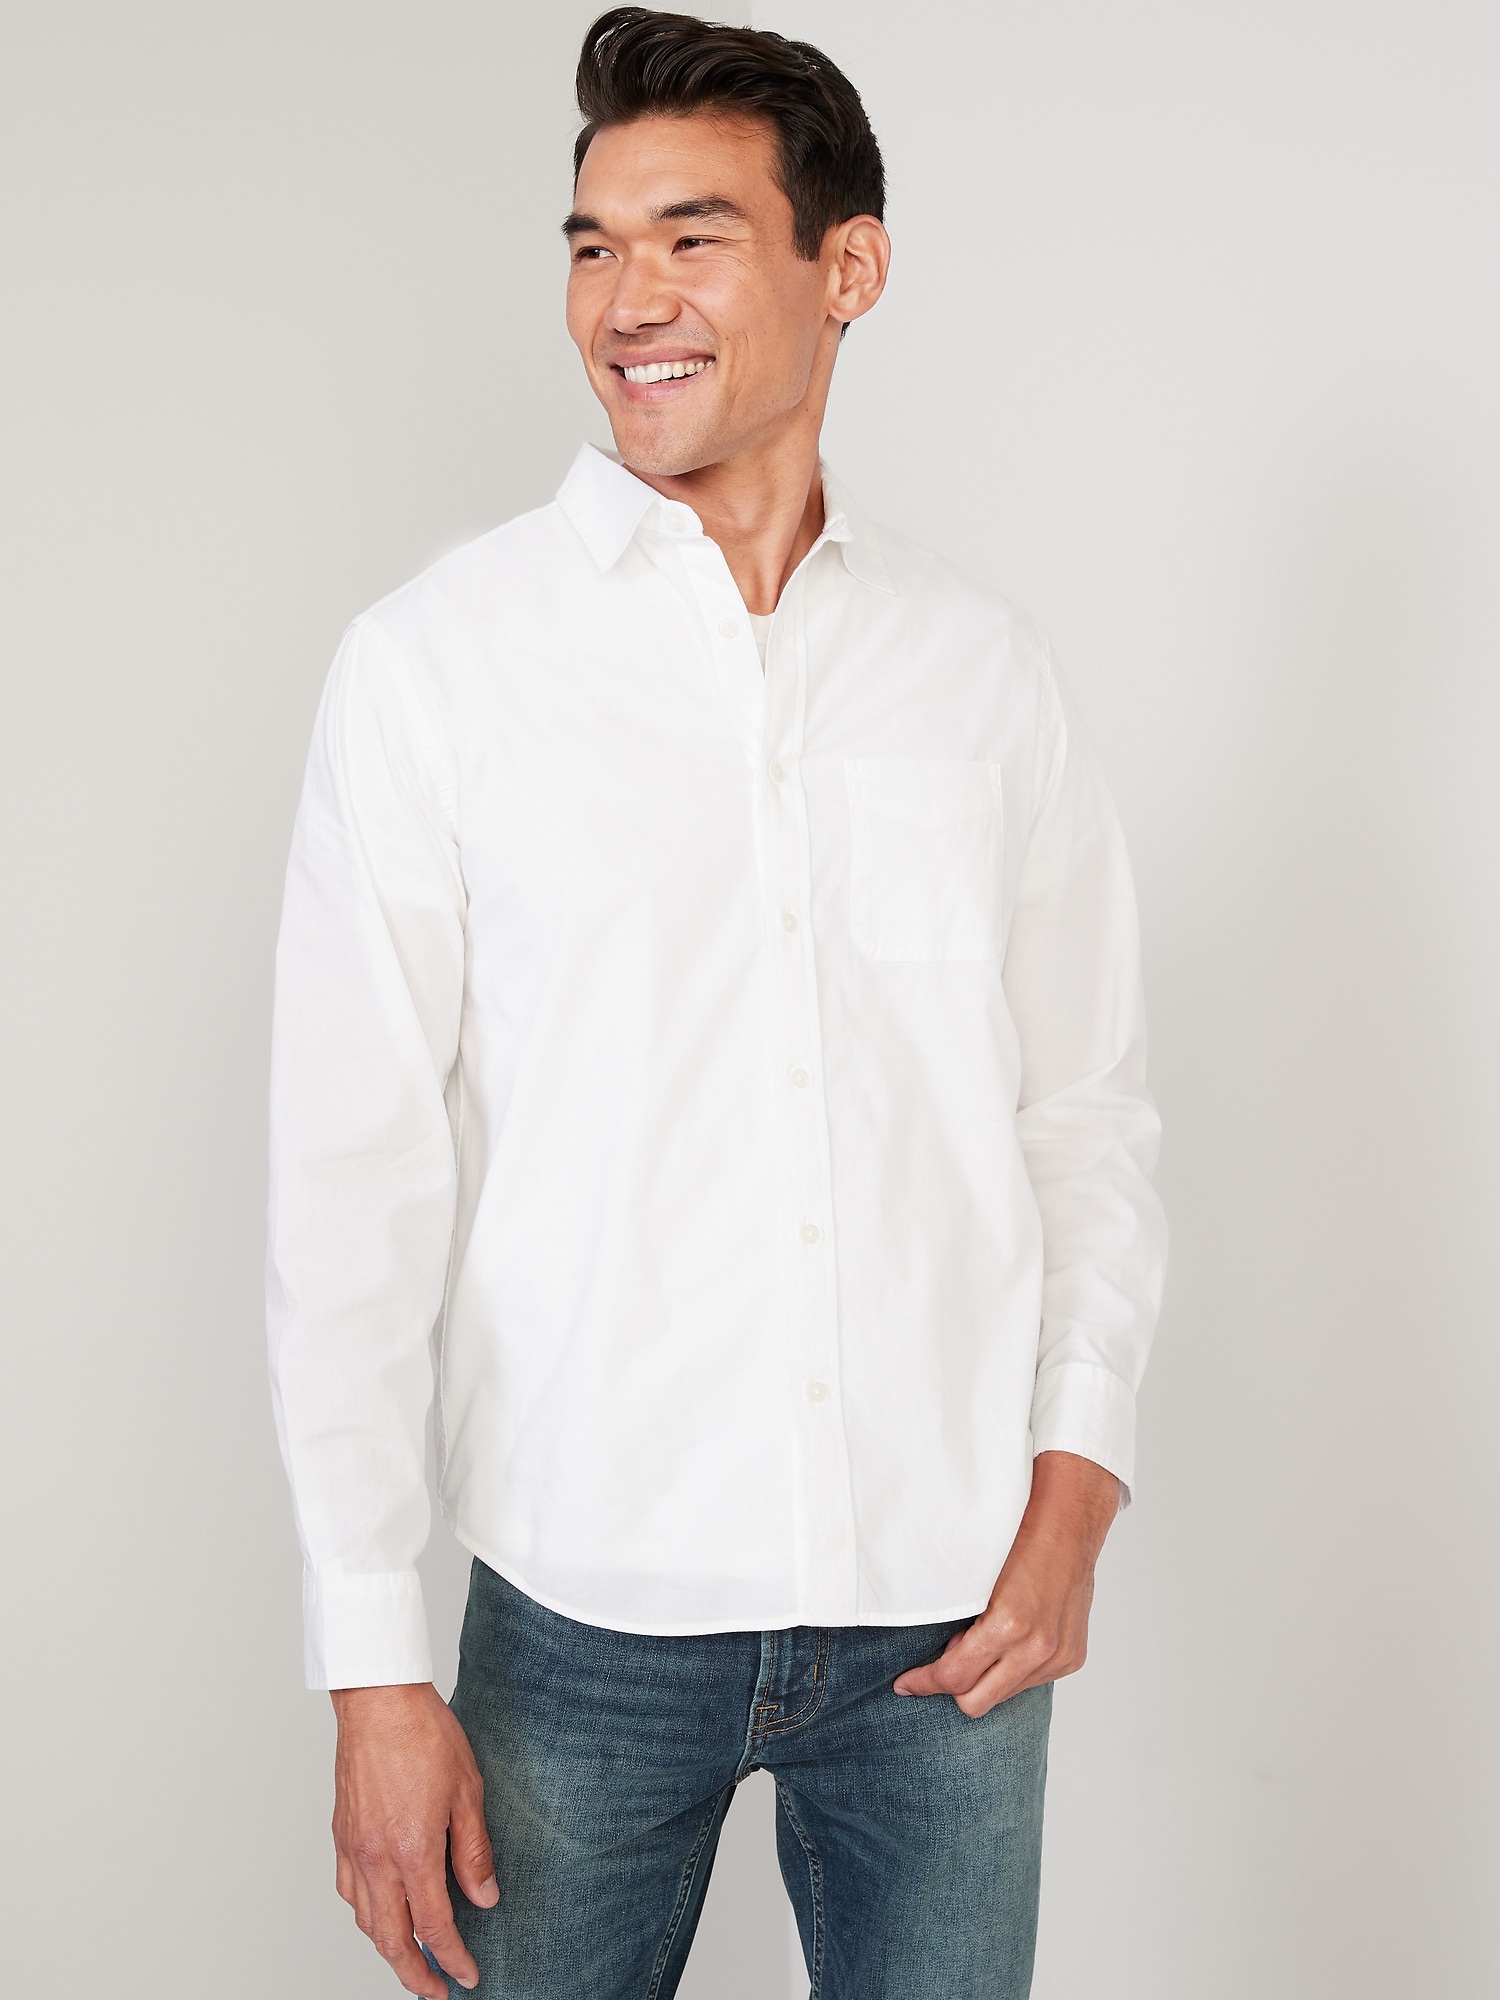 Old Navy Classic Fit Everyday Shirt white. 1